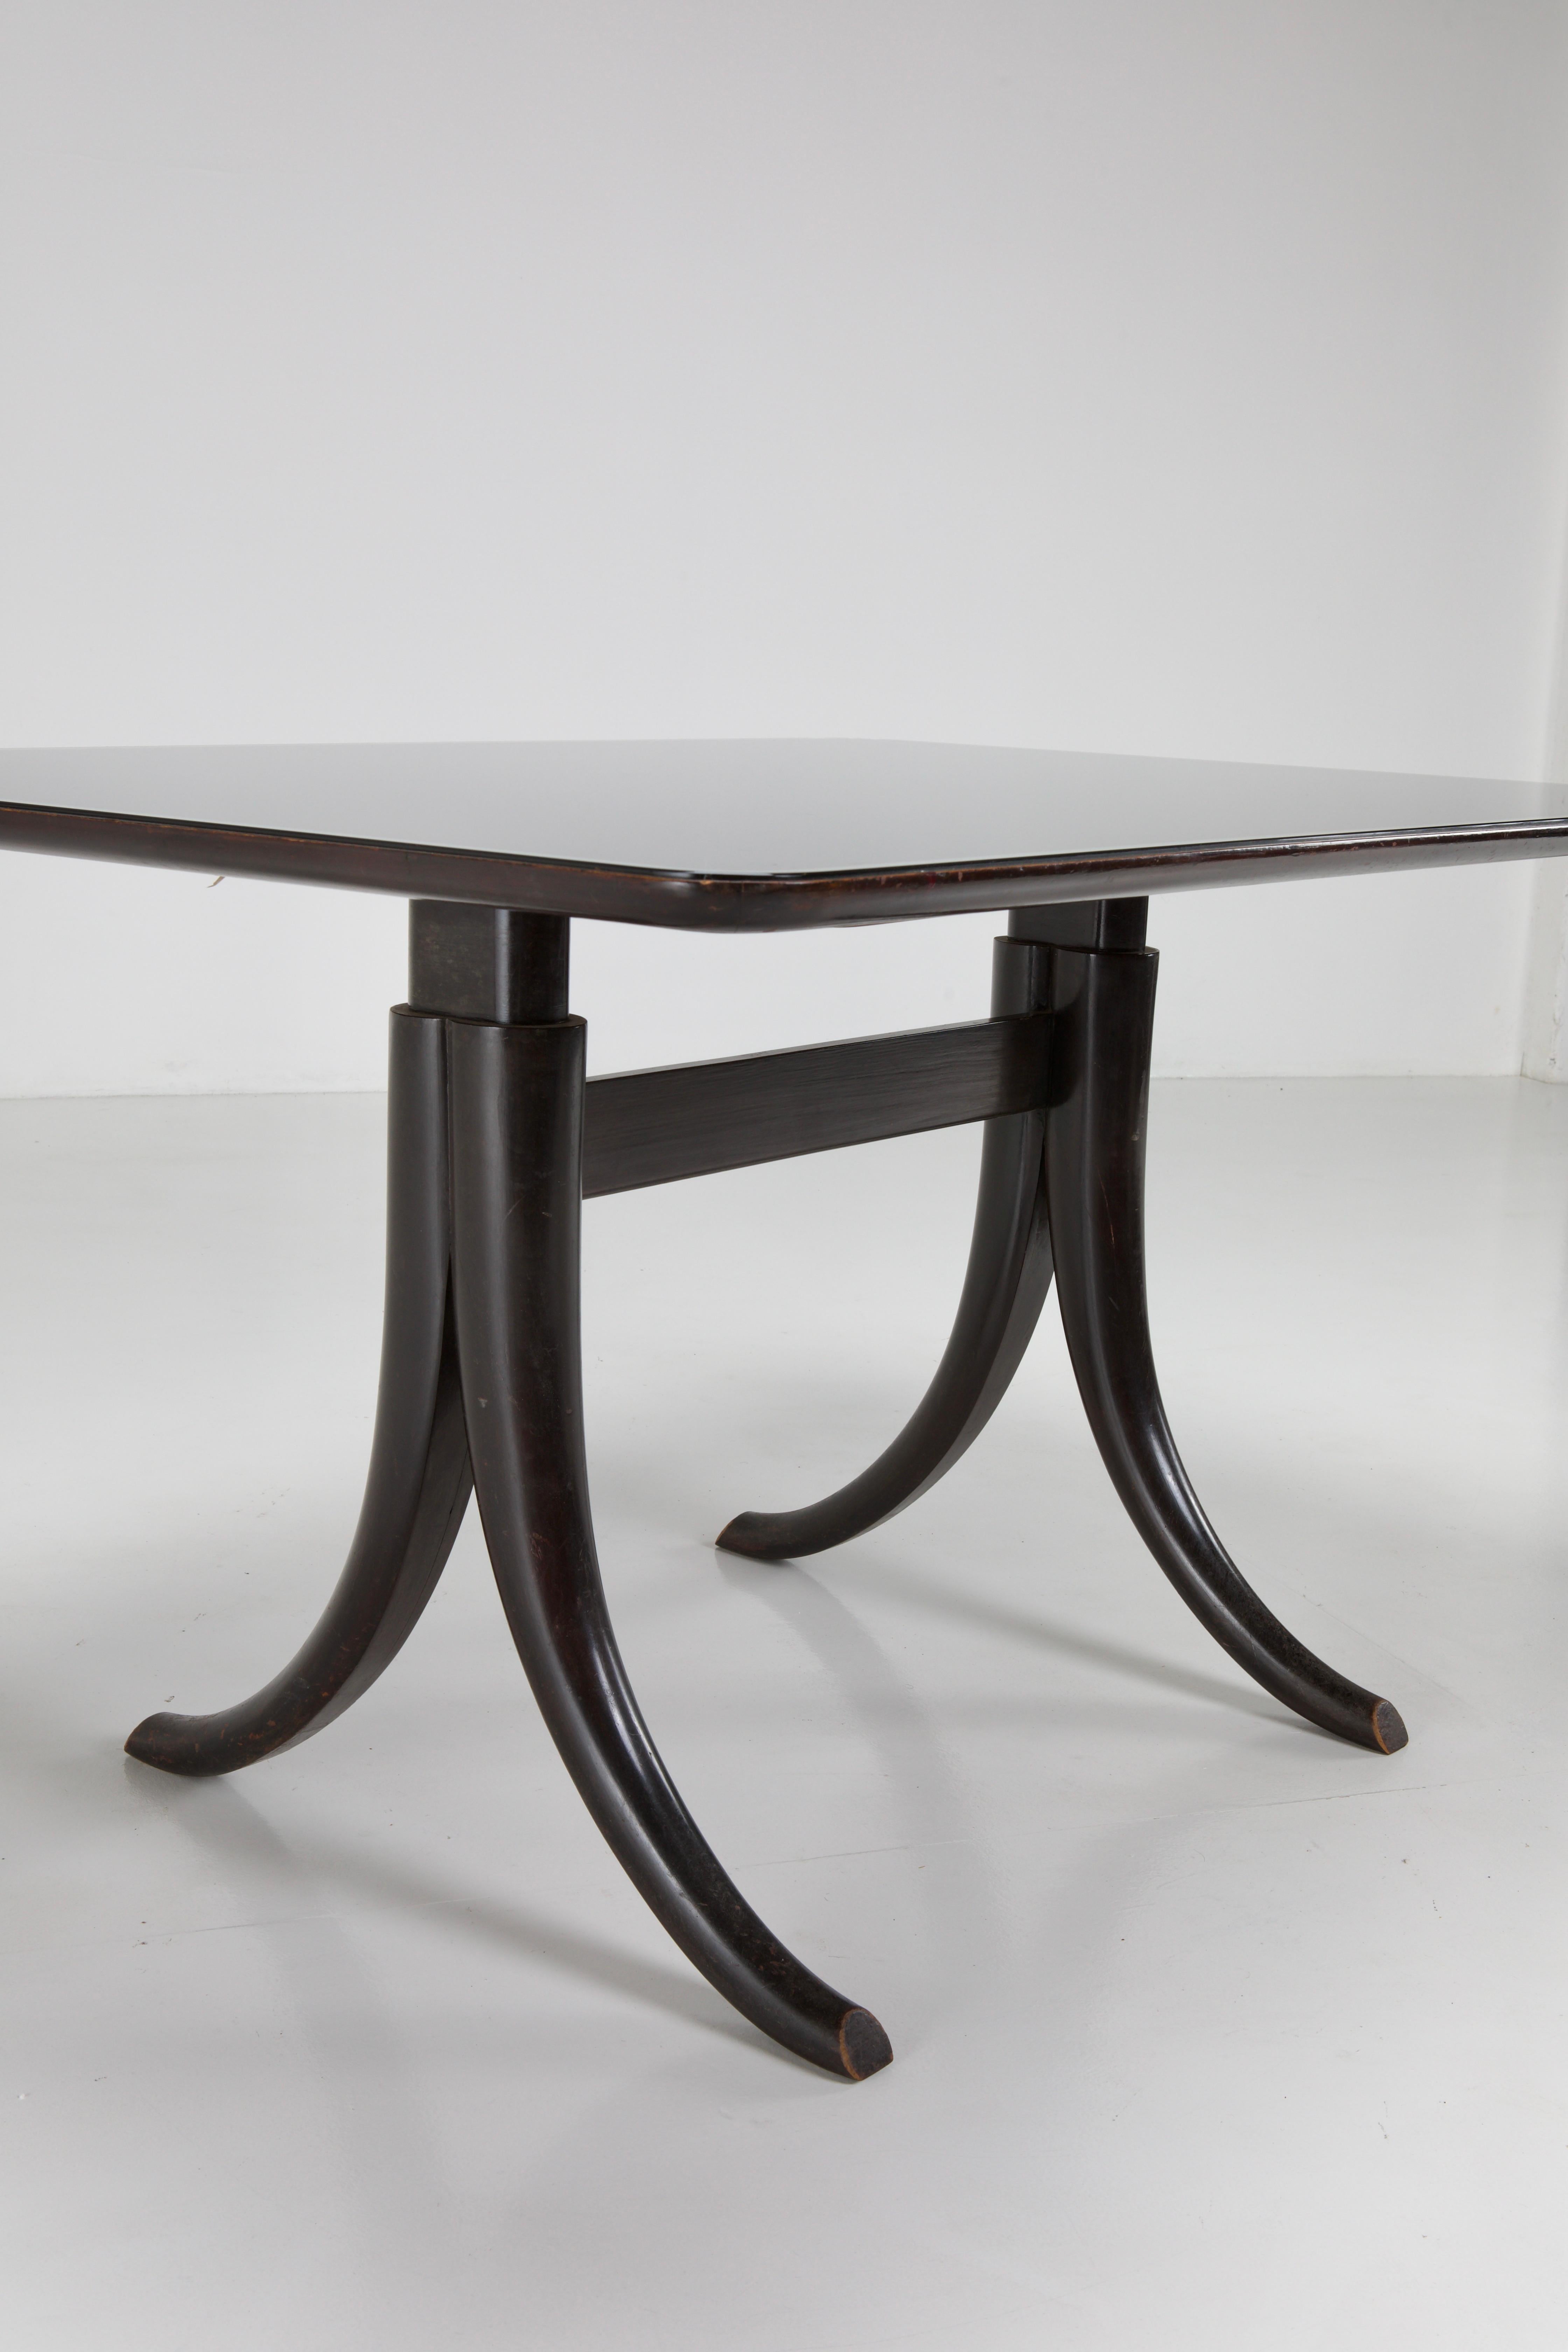 Stunning Rare Table by Pietro Chiesa, Italian Design 1930s In Good Condition For Sale In Milan, IT